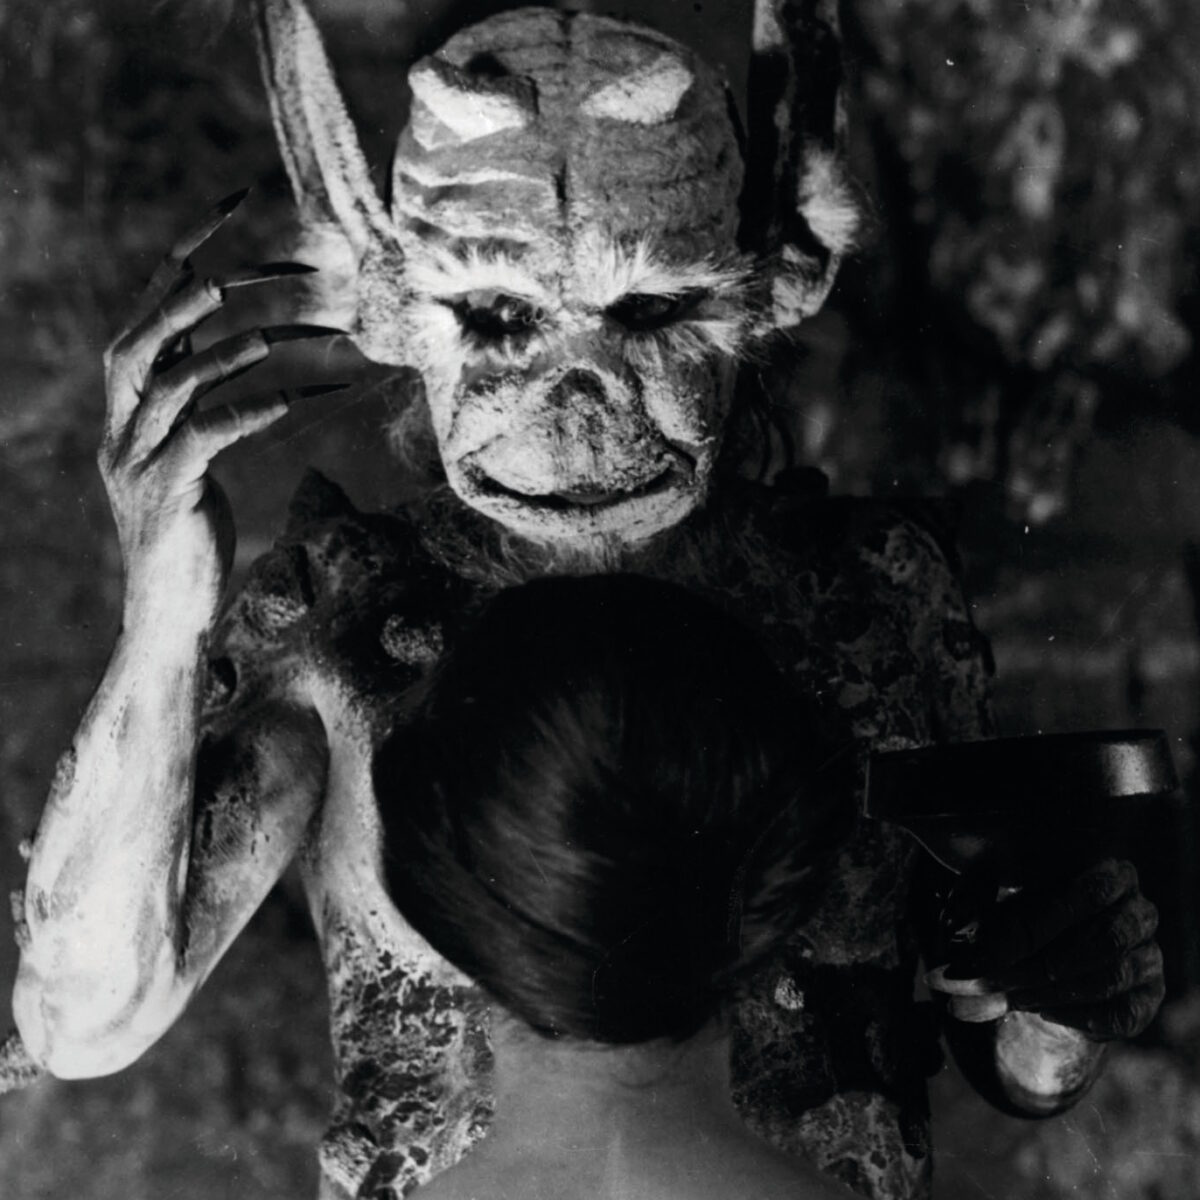 RONDO AWARD-NOMINEE, BEST ARTICLE: Hex of the Century – The Enduring Legacy of “HÄXAN”